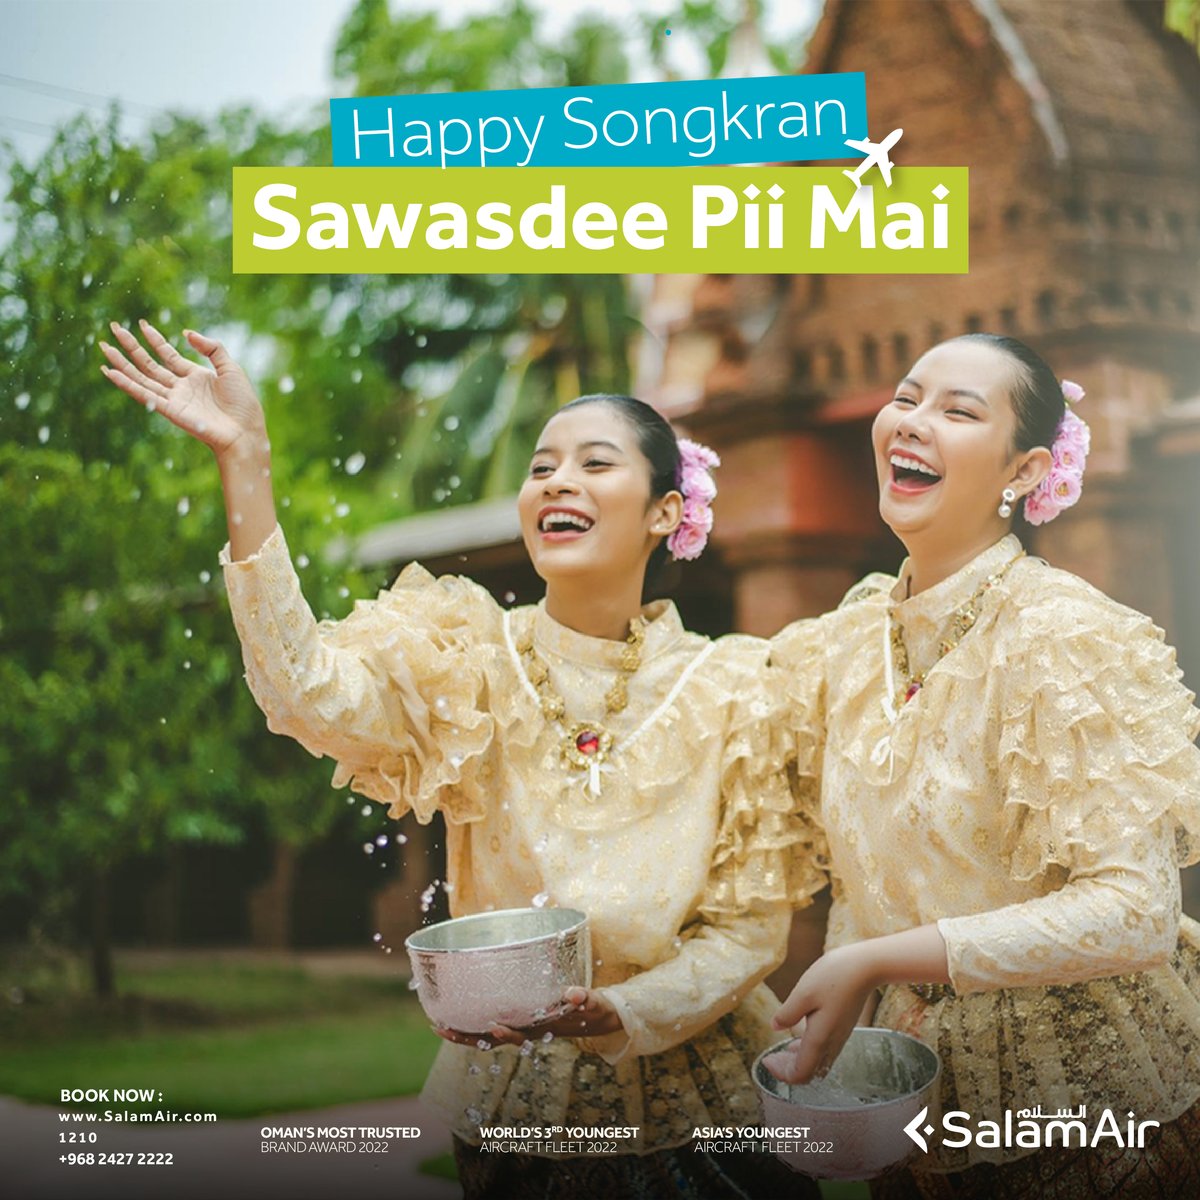 As the water splashes and the festivities begin, we wish you a wonderful Songkran! 🌊